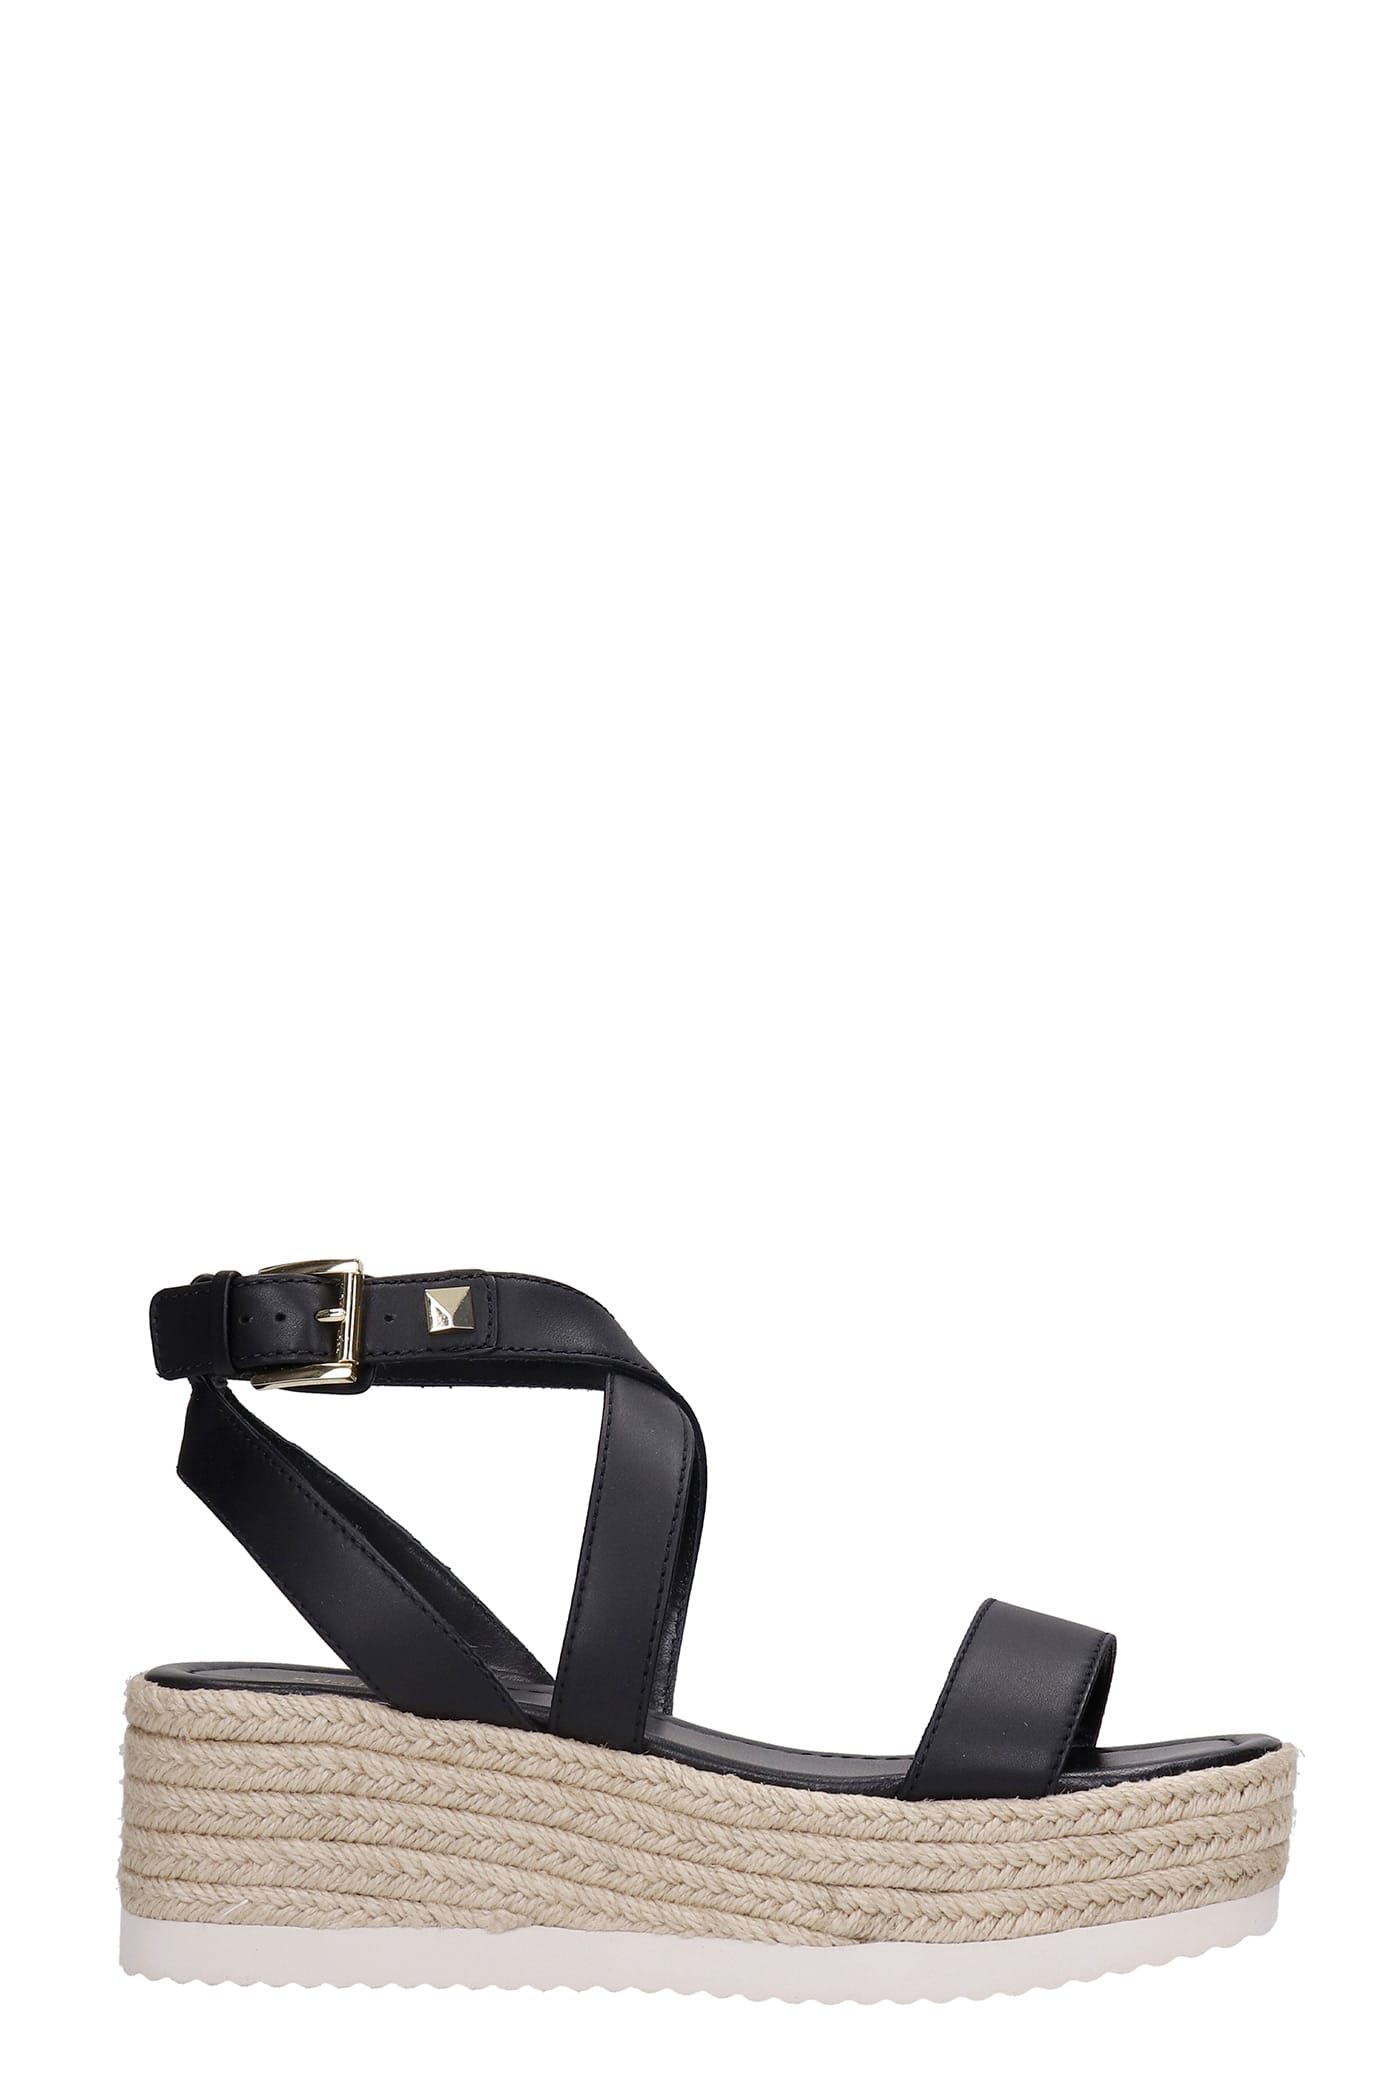 Buy Michael Kors Lowry Wedges In Black Leather online, shop Michael Kors shoes with free shipping